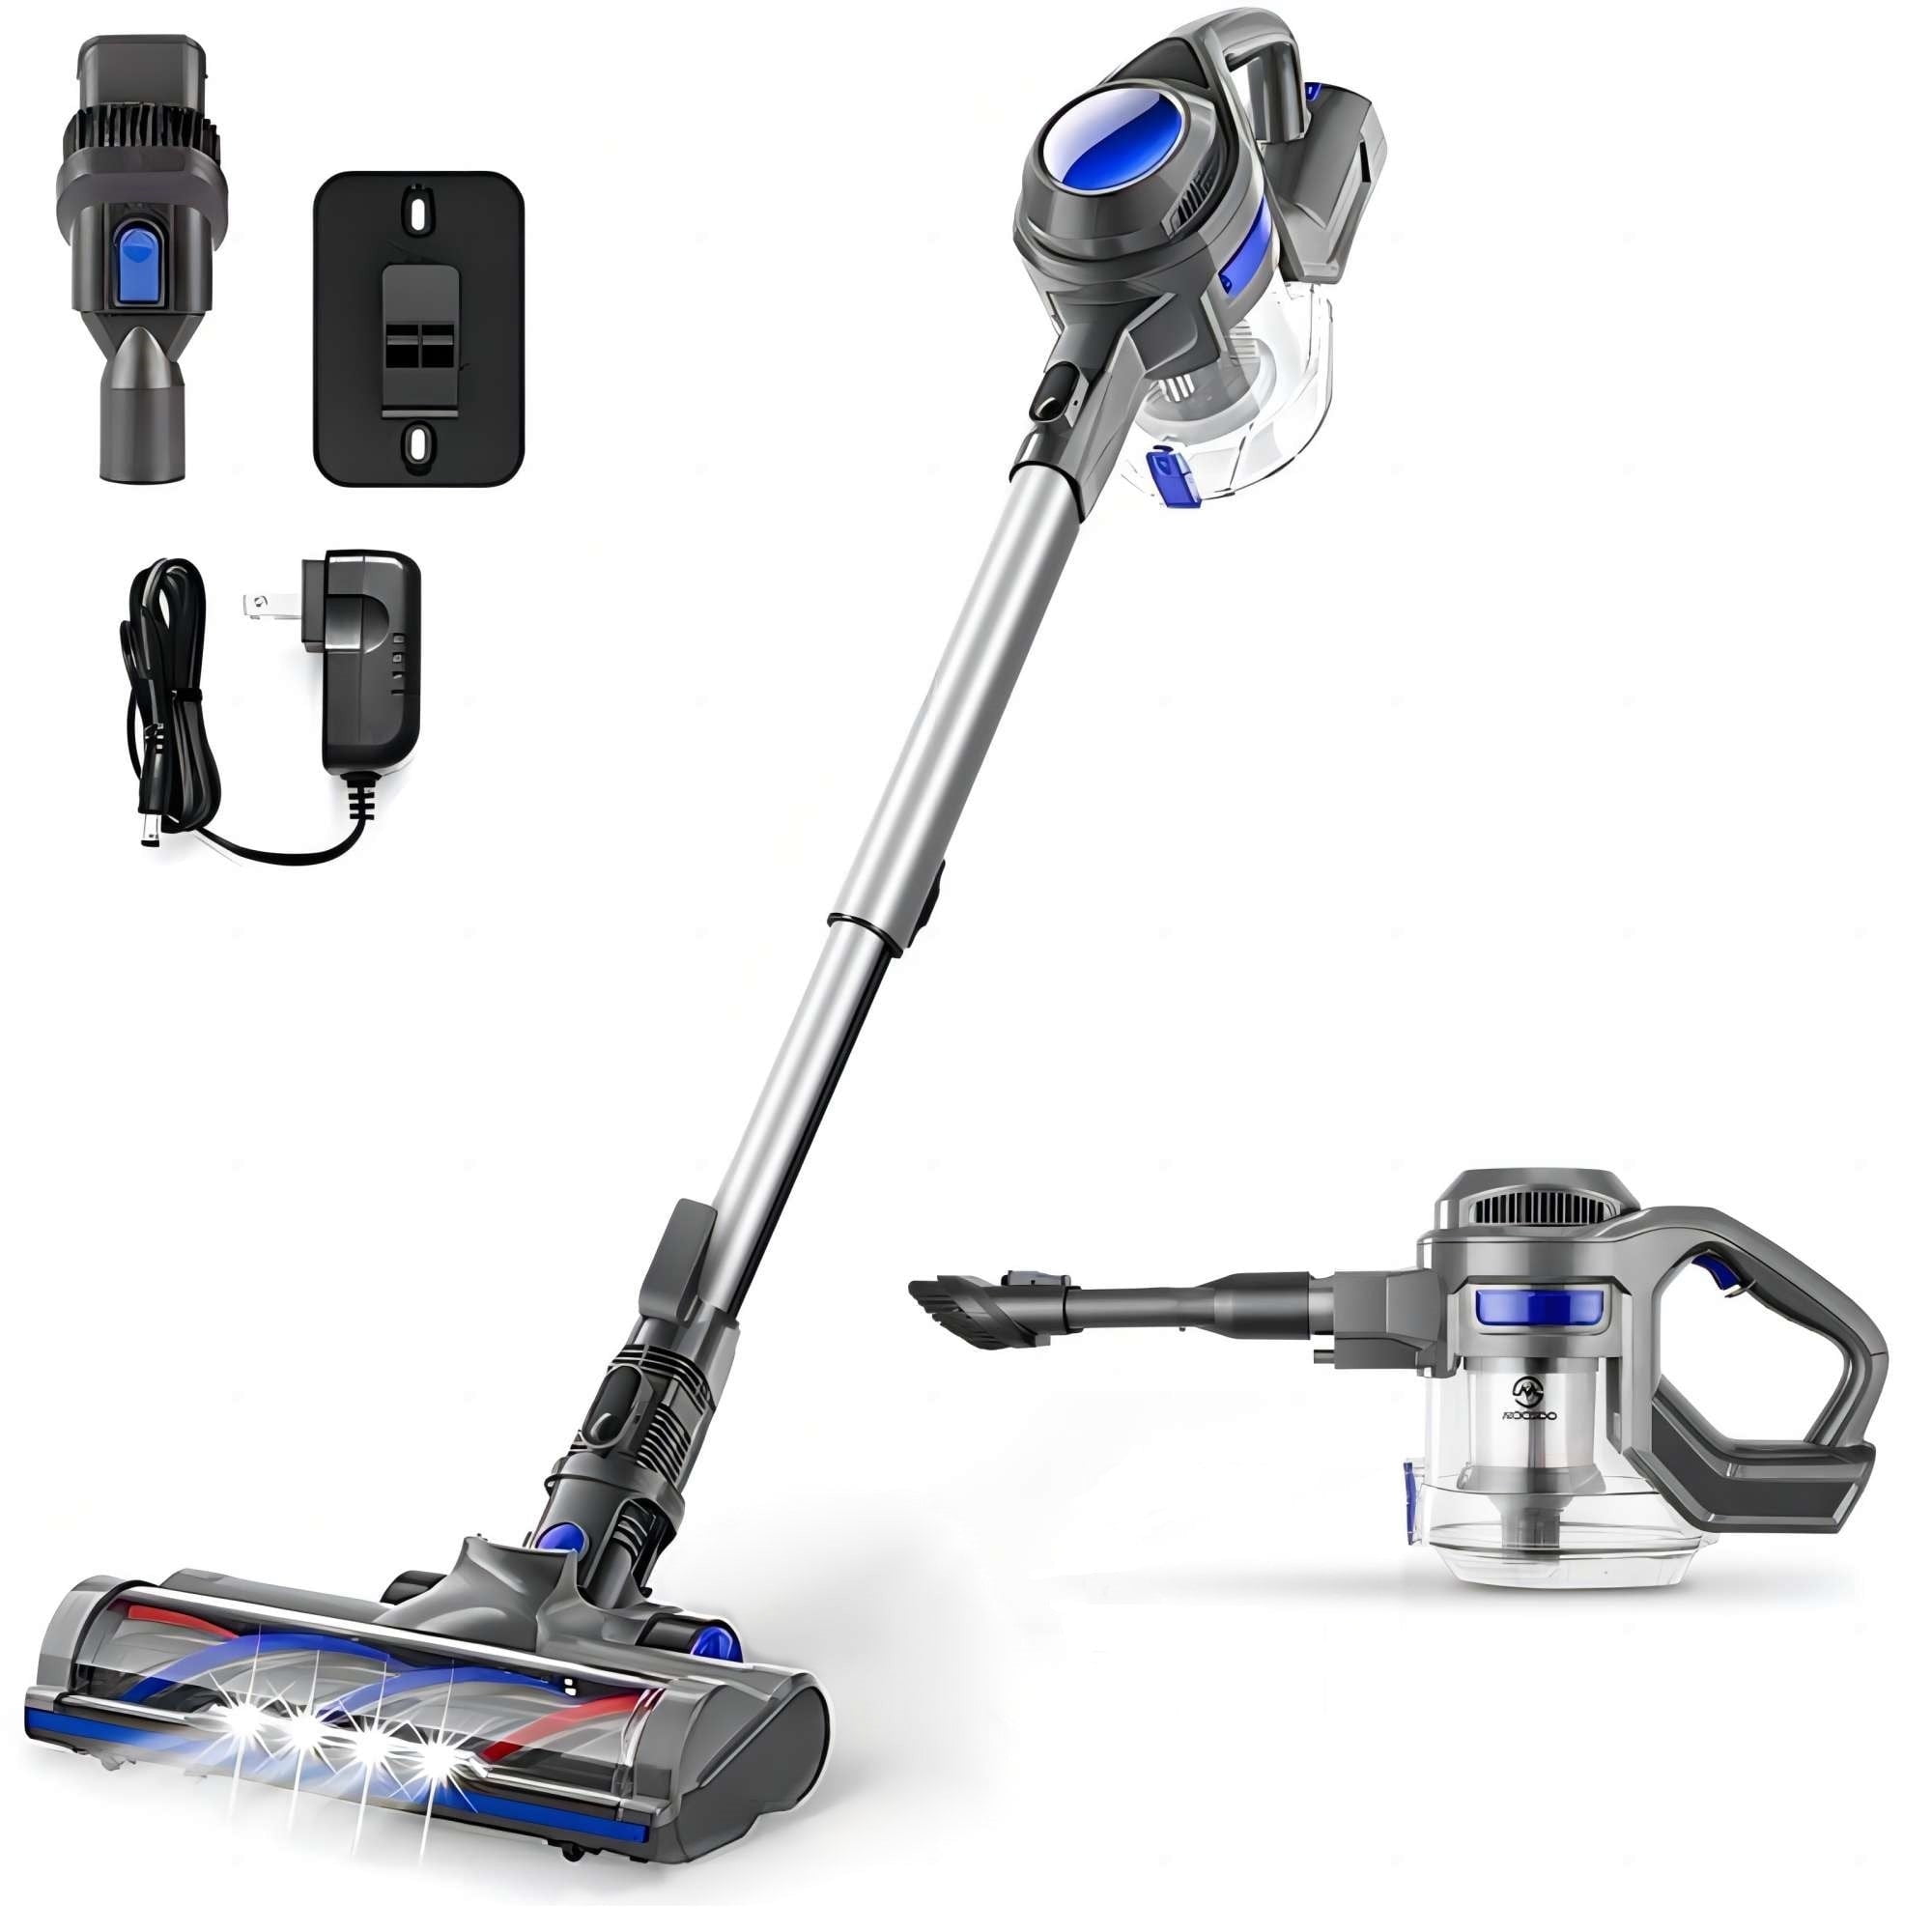 Restored Samsung Jet 75 Complete Cordless Stick Vacuum with Long-Lasting  Battery and Samsung Clean Station VS20T7536P5/AA (Refurbished)